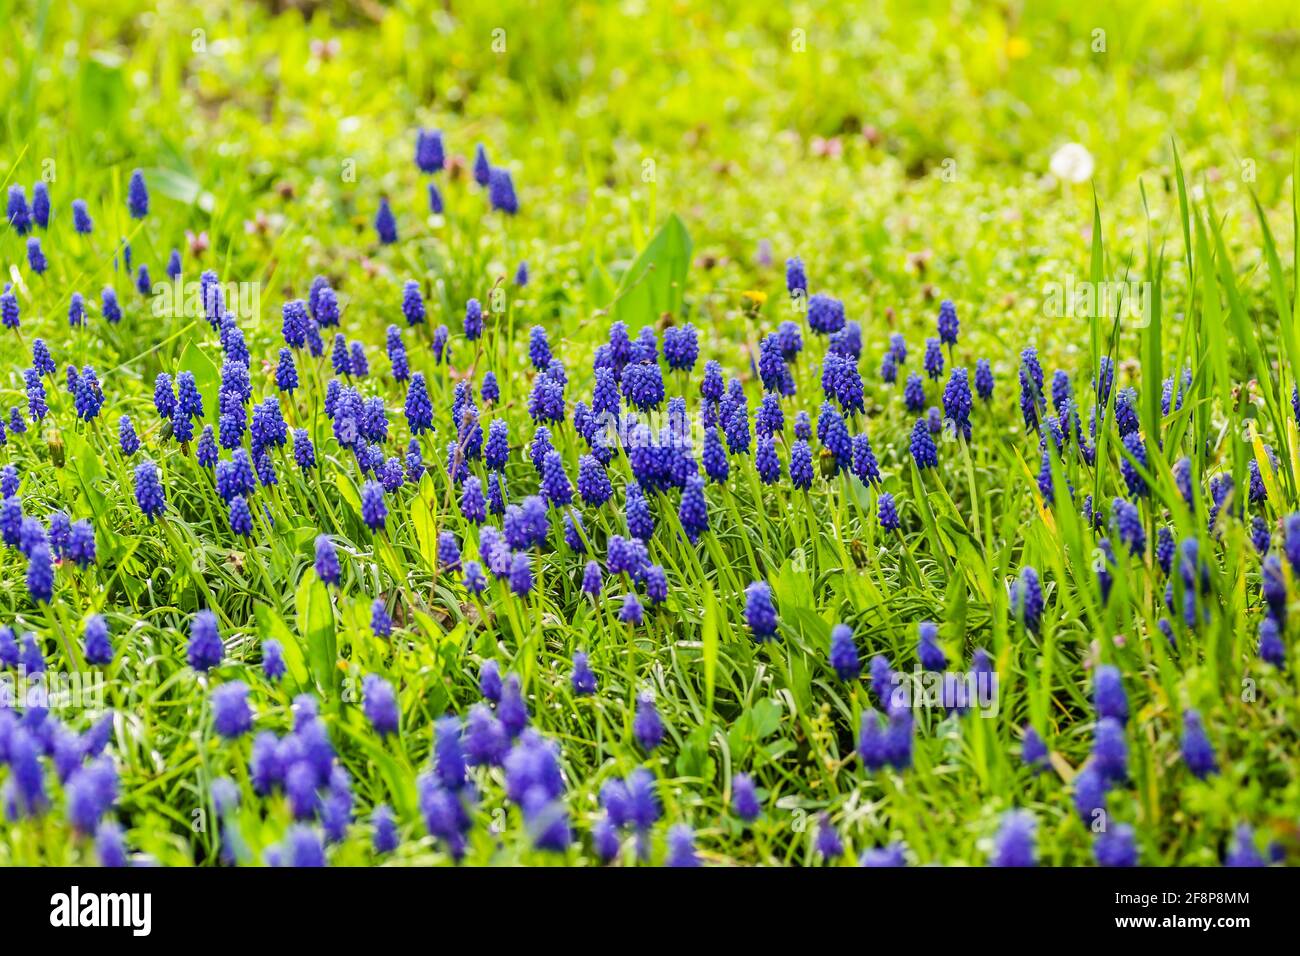 (Muscari botryoides) is a perennial herbaceous plant from the hyacinth family. Stock Photo